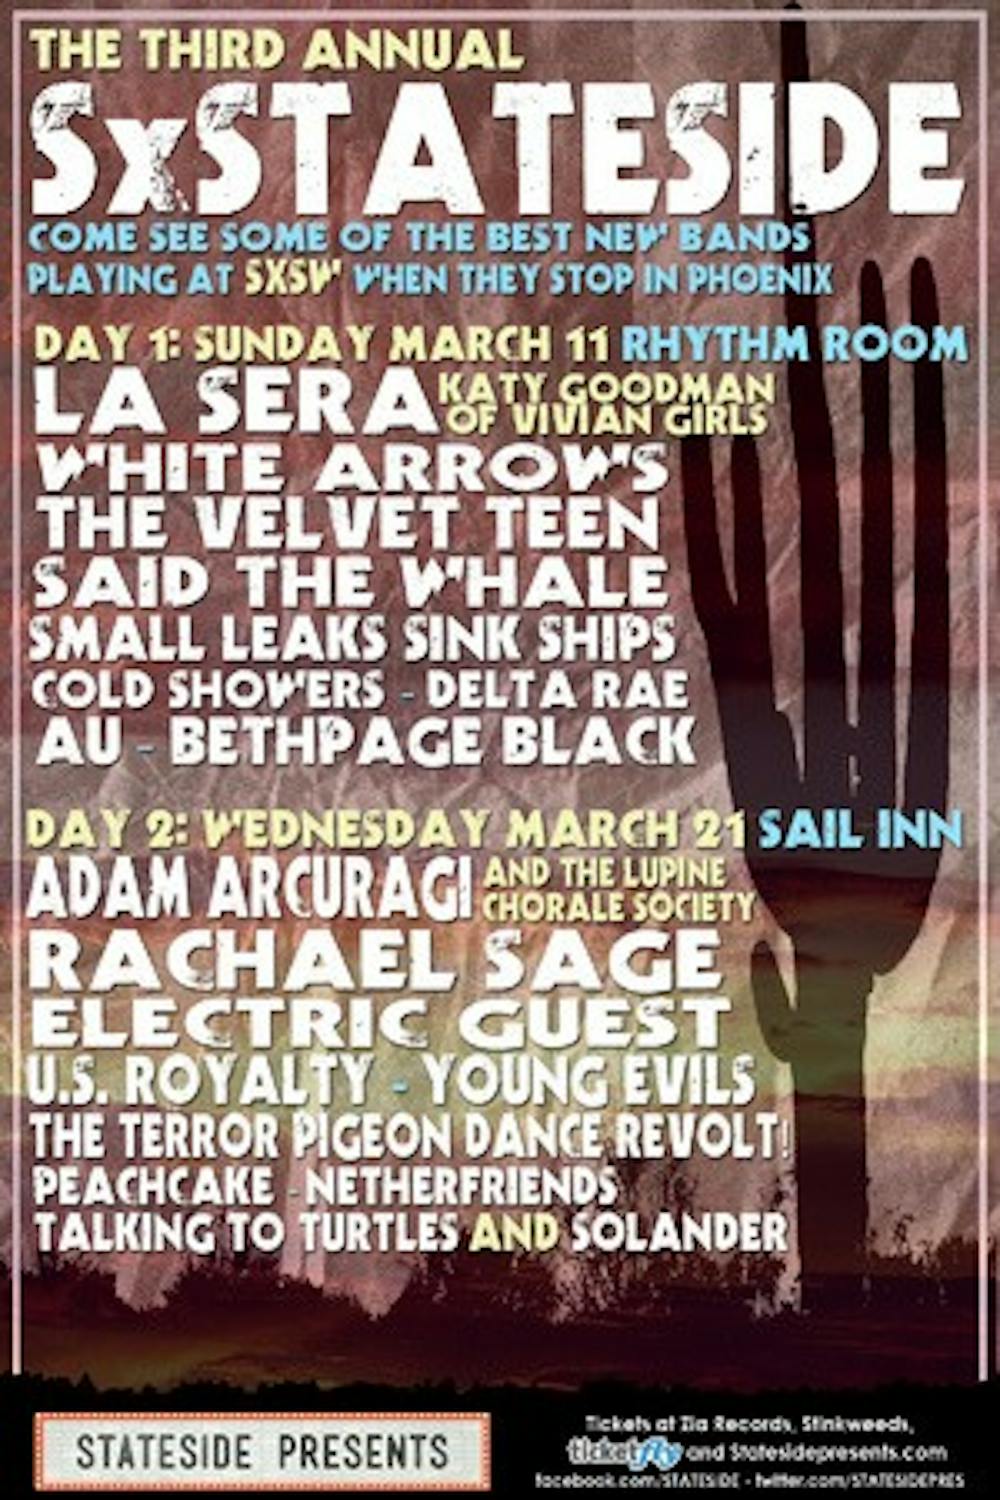 The concert poster for SXStateside. Image from statesidepresents.com.